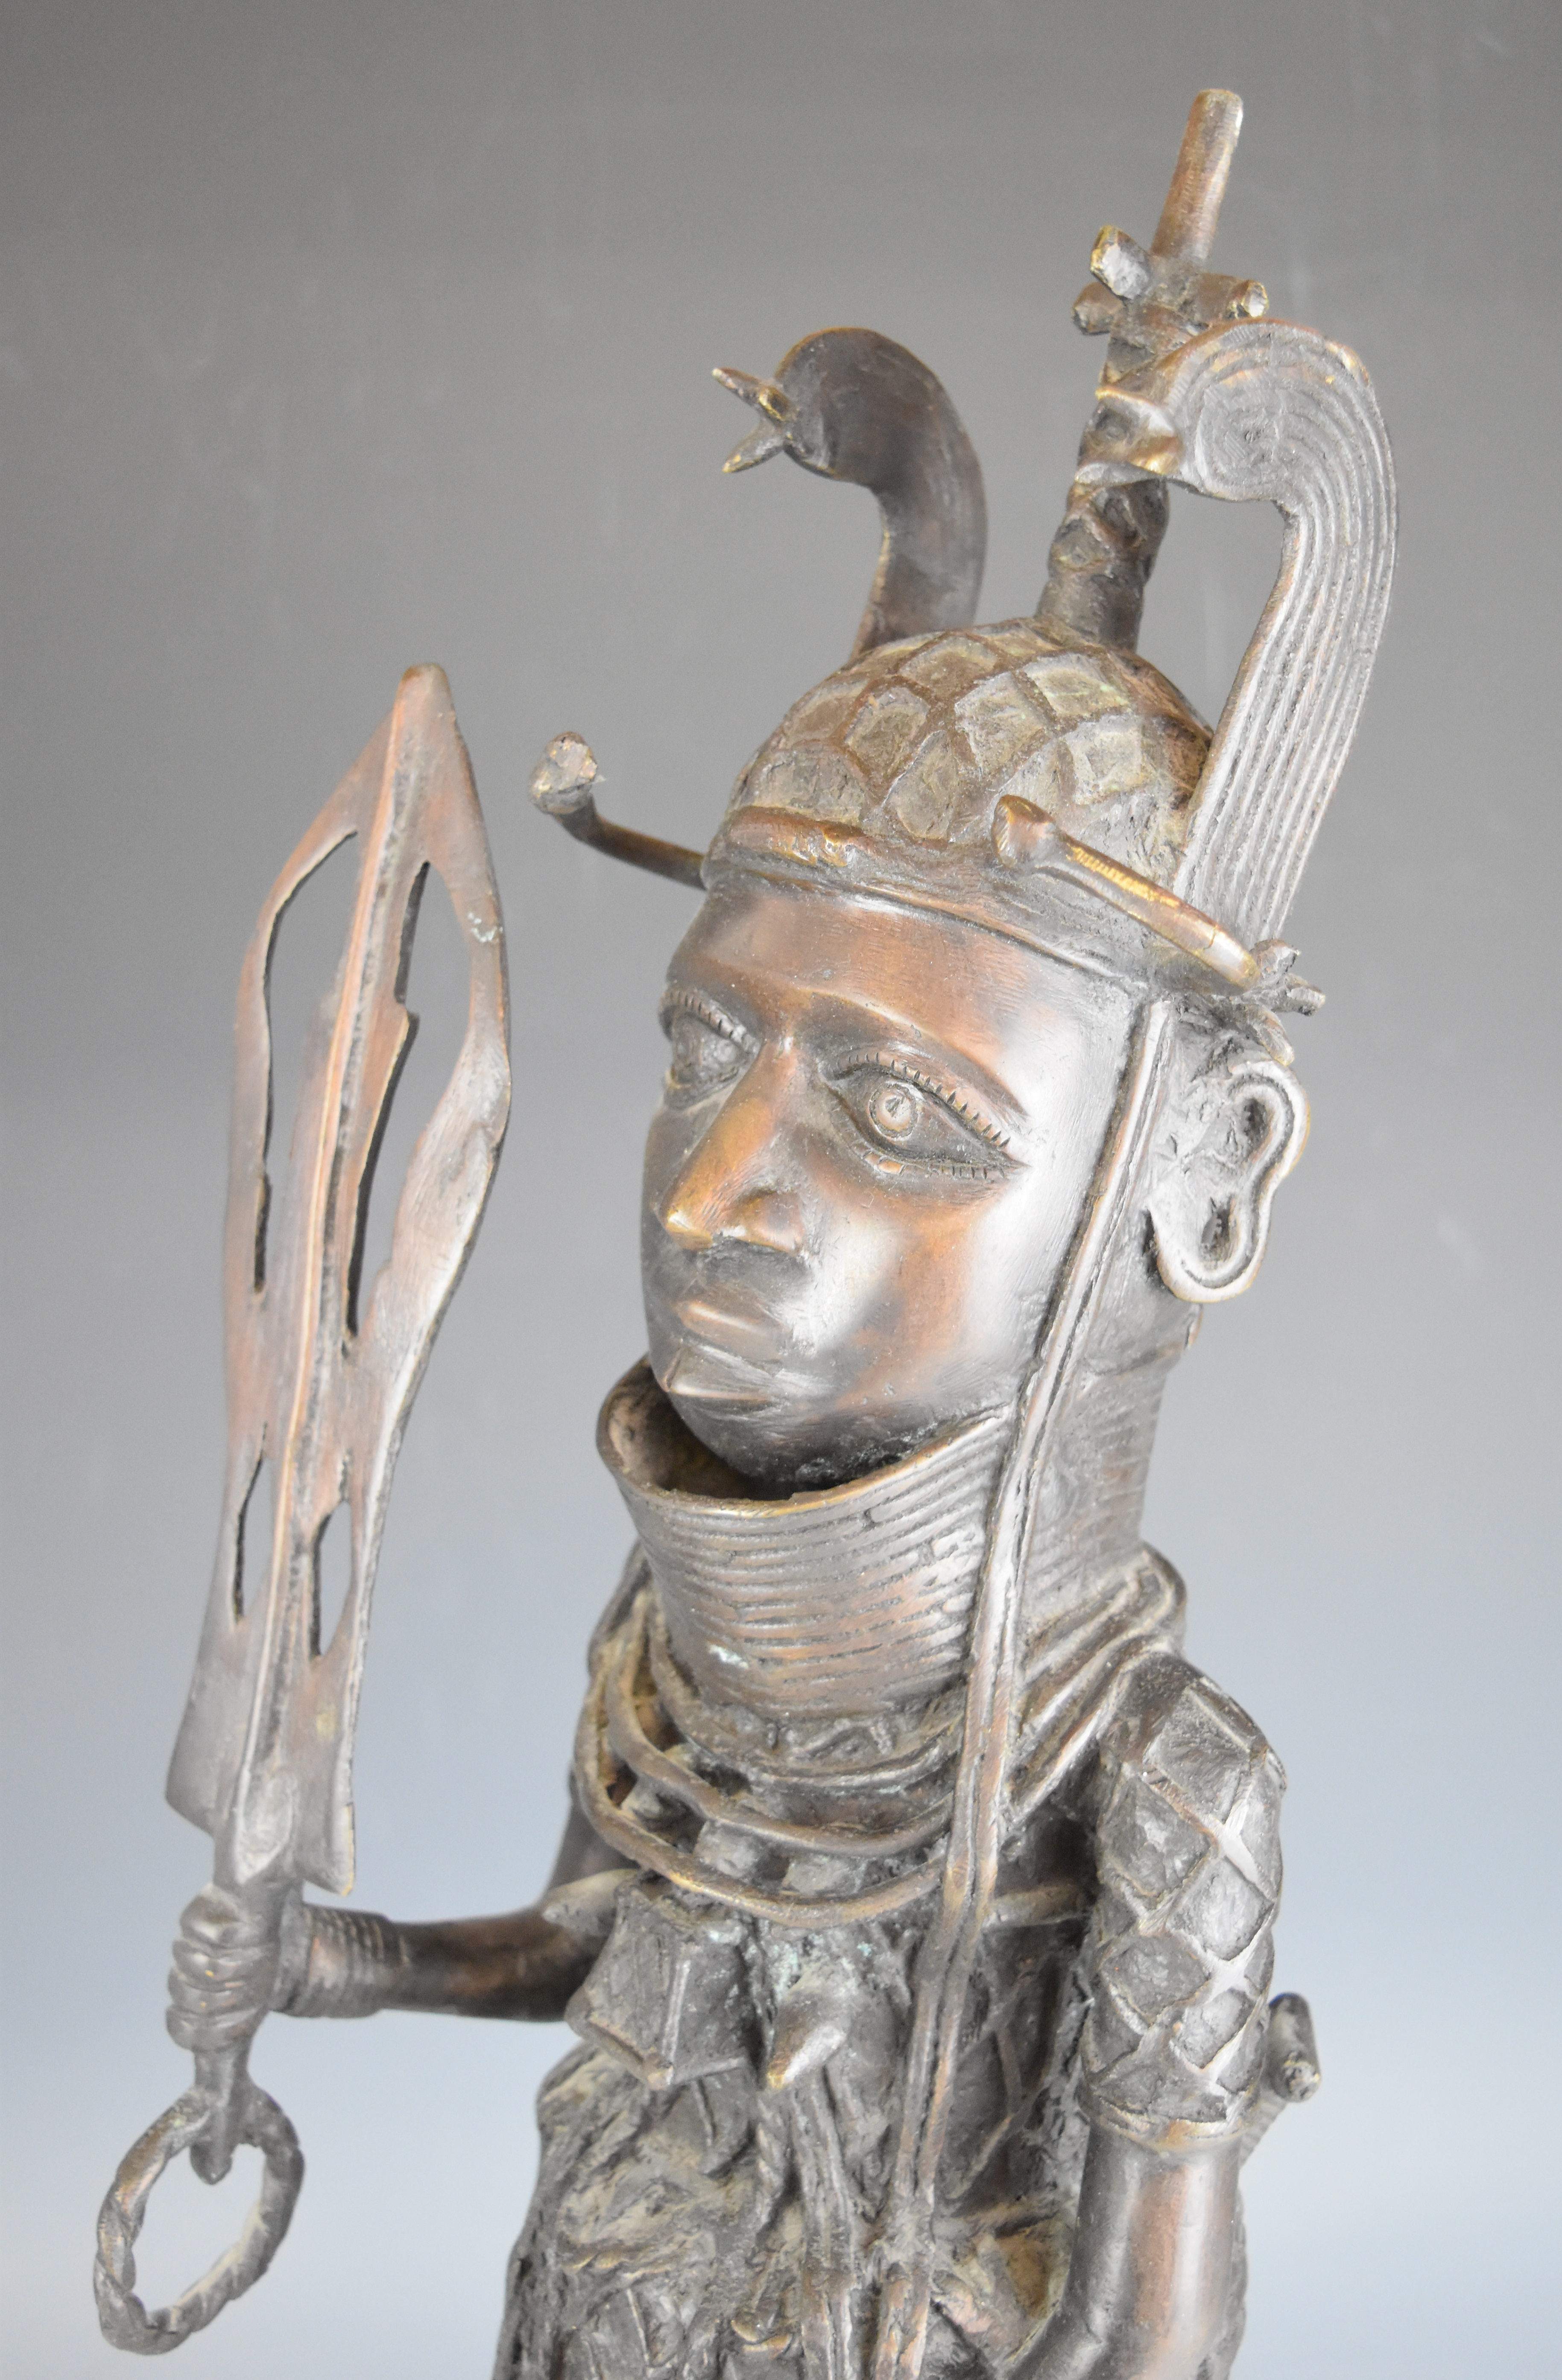 Large Benin bronze or similar figure of a warrior, height 61cm - Image 2 of 4